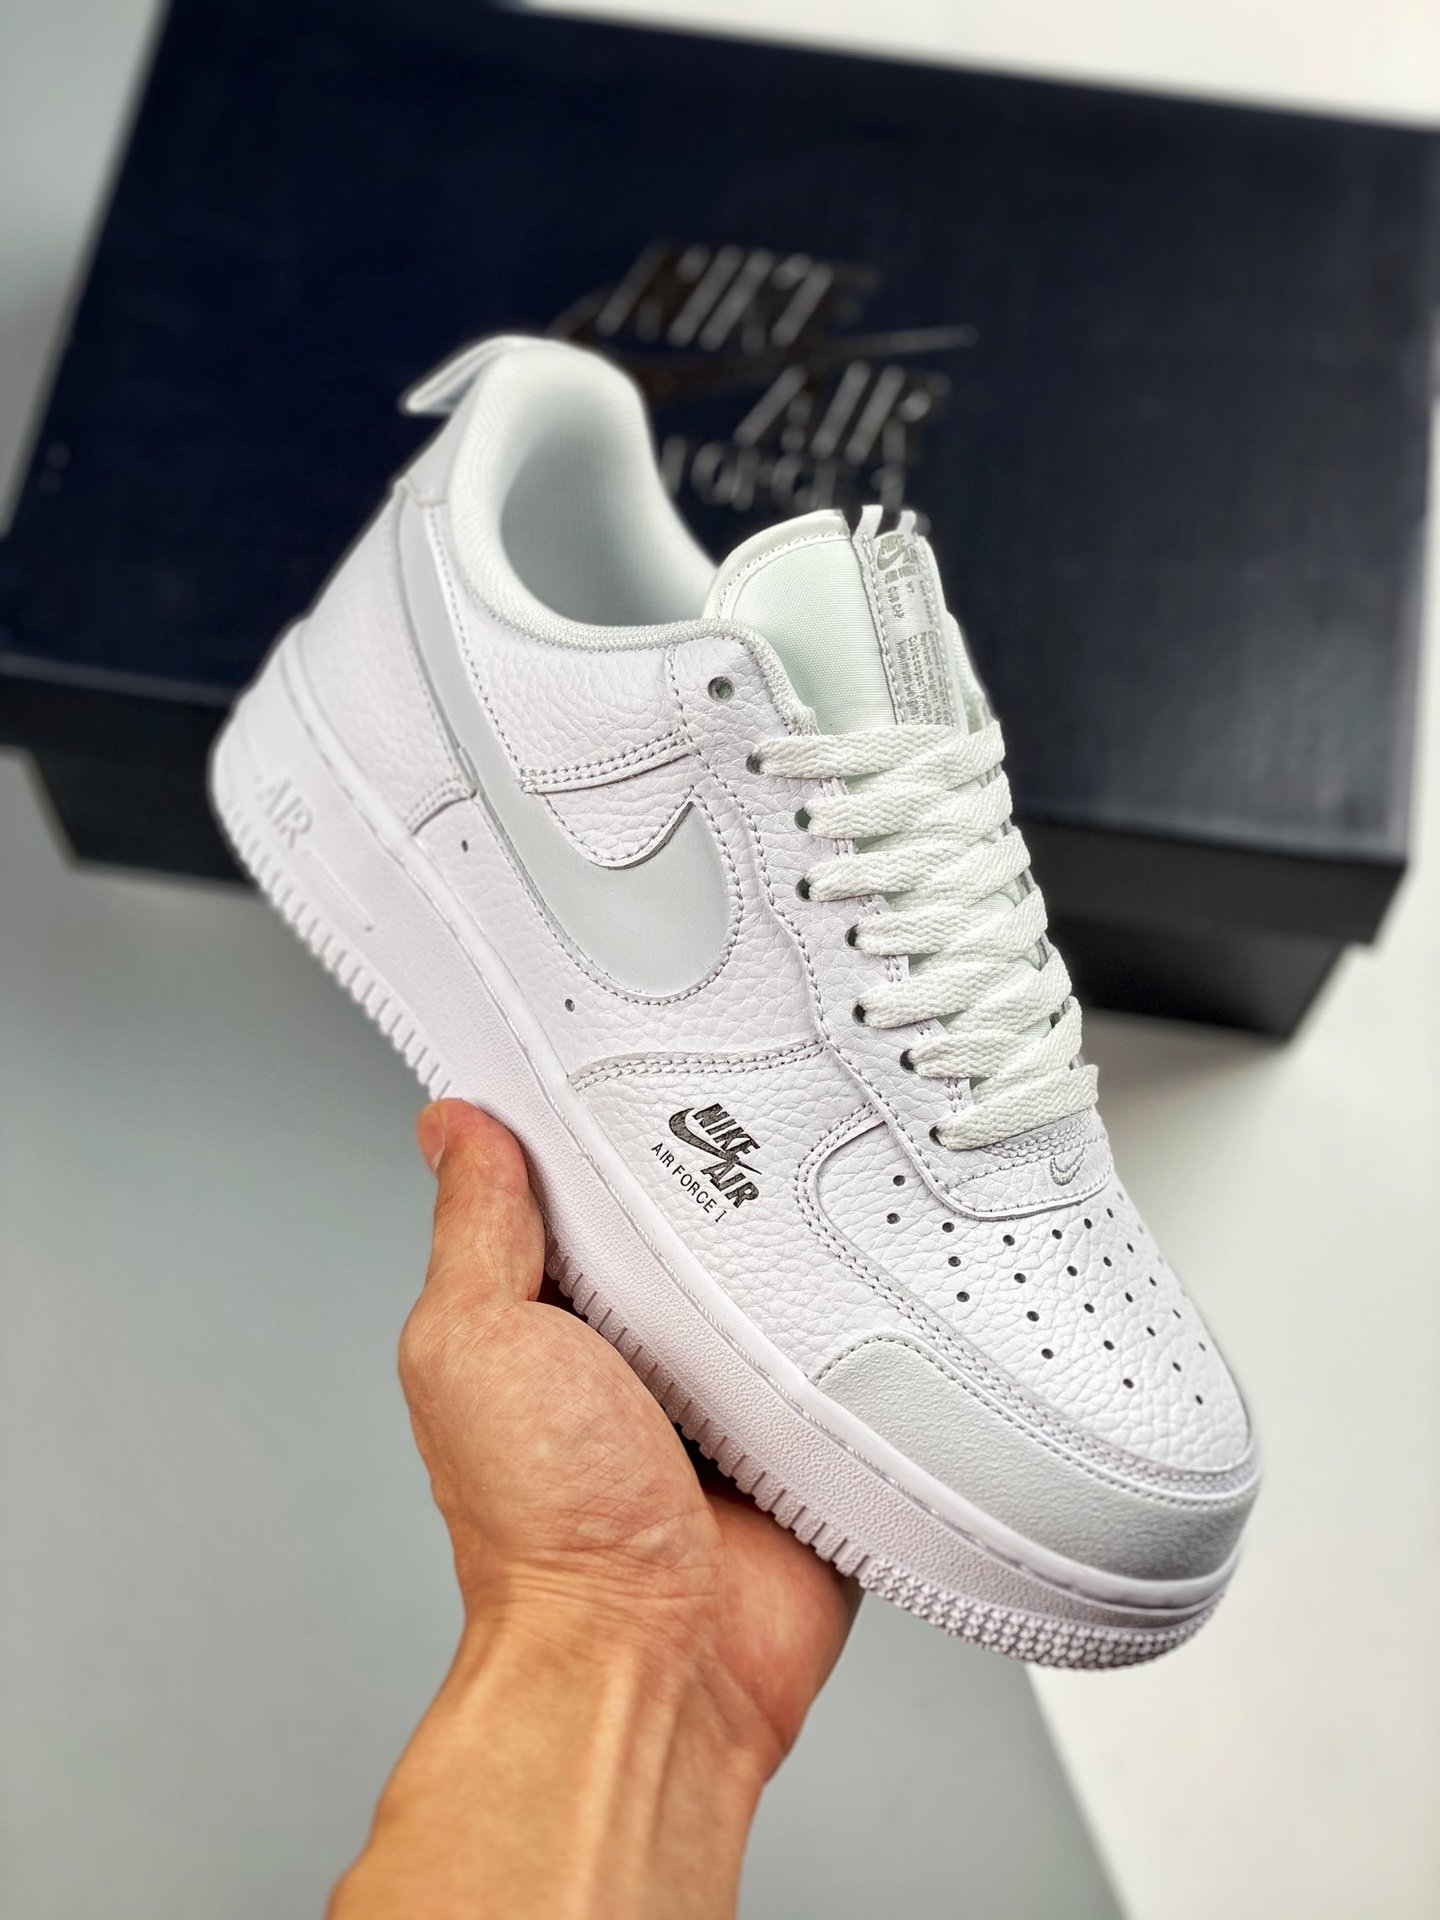 Nike Air Force 1 Low White Reflective Swooshes For Sale – Sneaker Hello